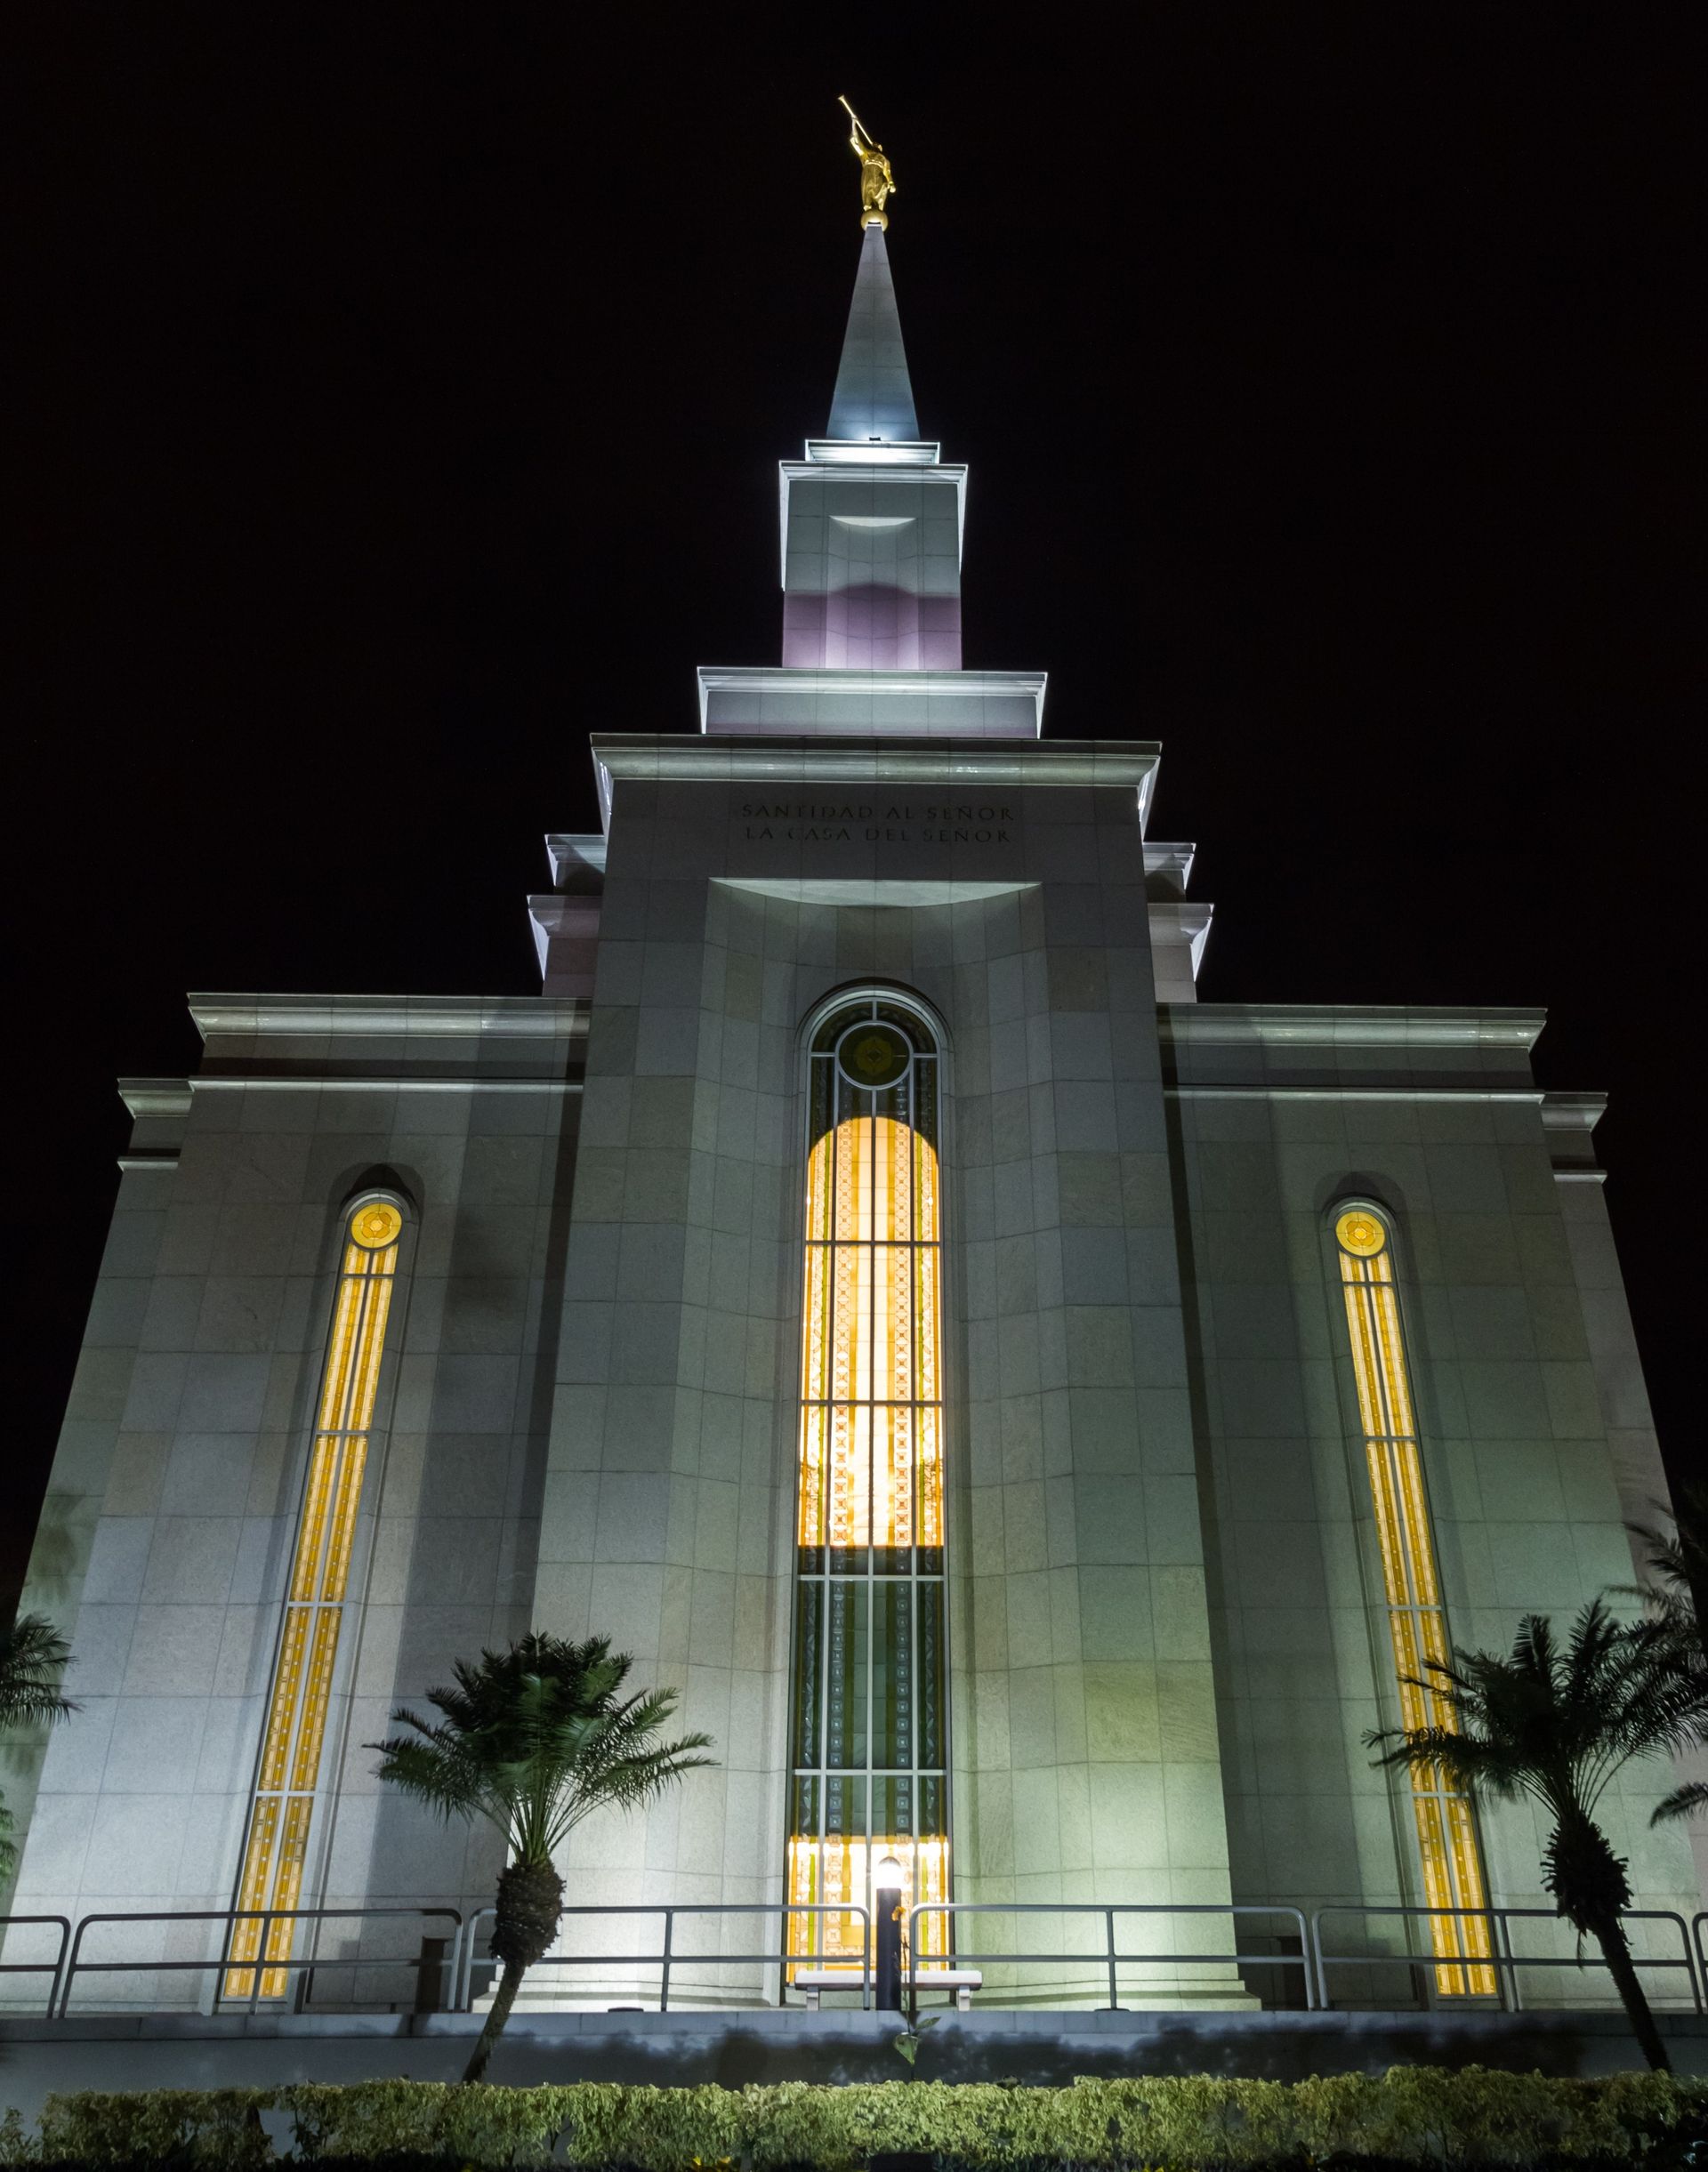 The Guayaquil Ecuador Temple is lit up at night.